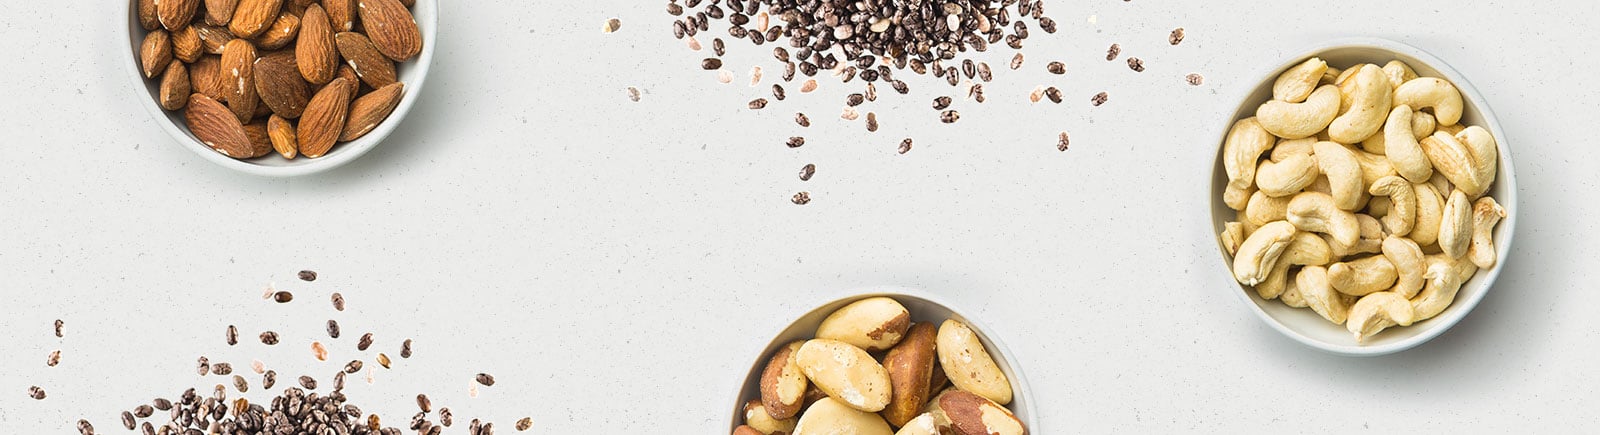 header image of nuts and seeds in bowls and scattered on the ground